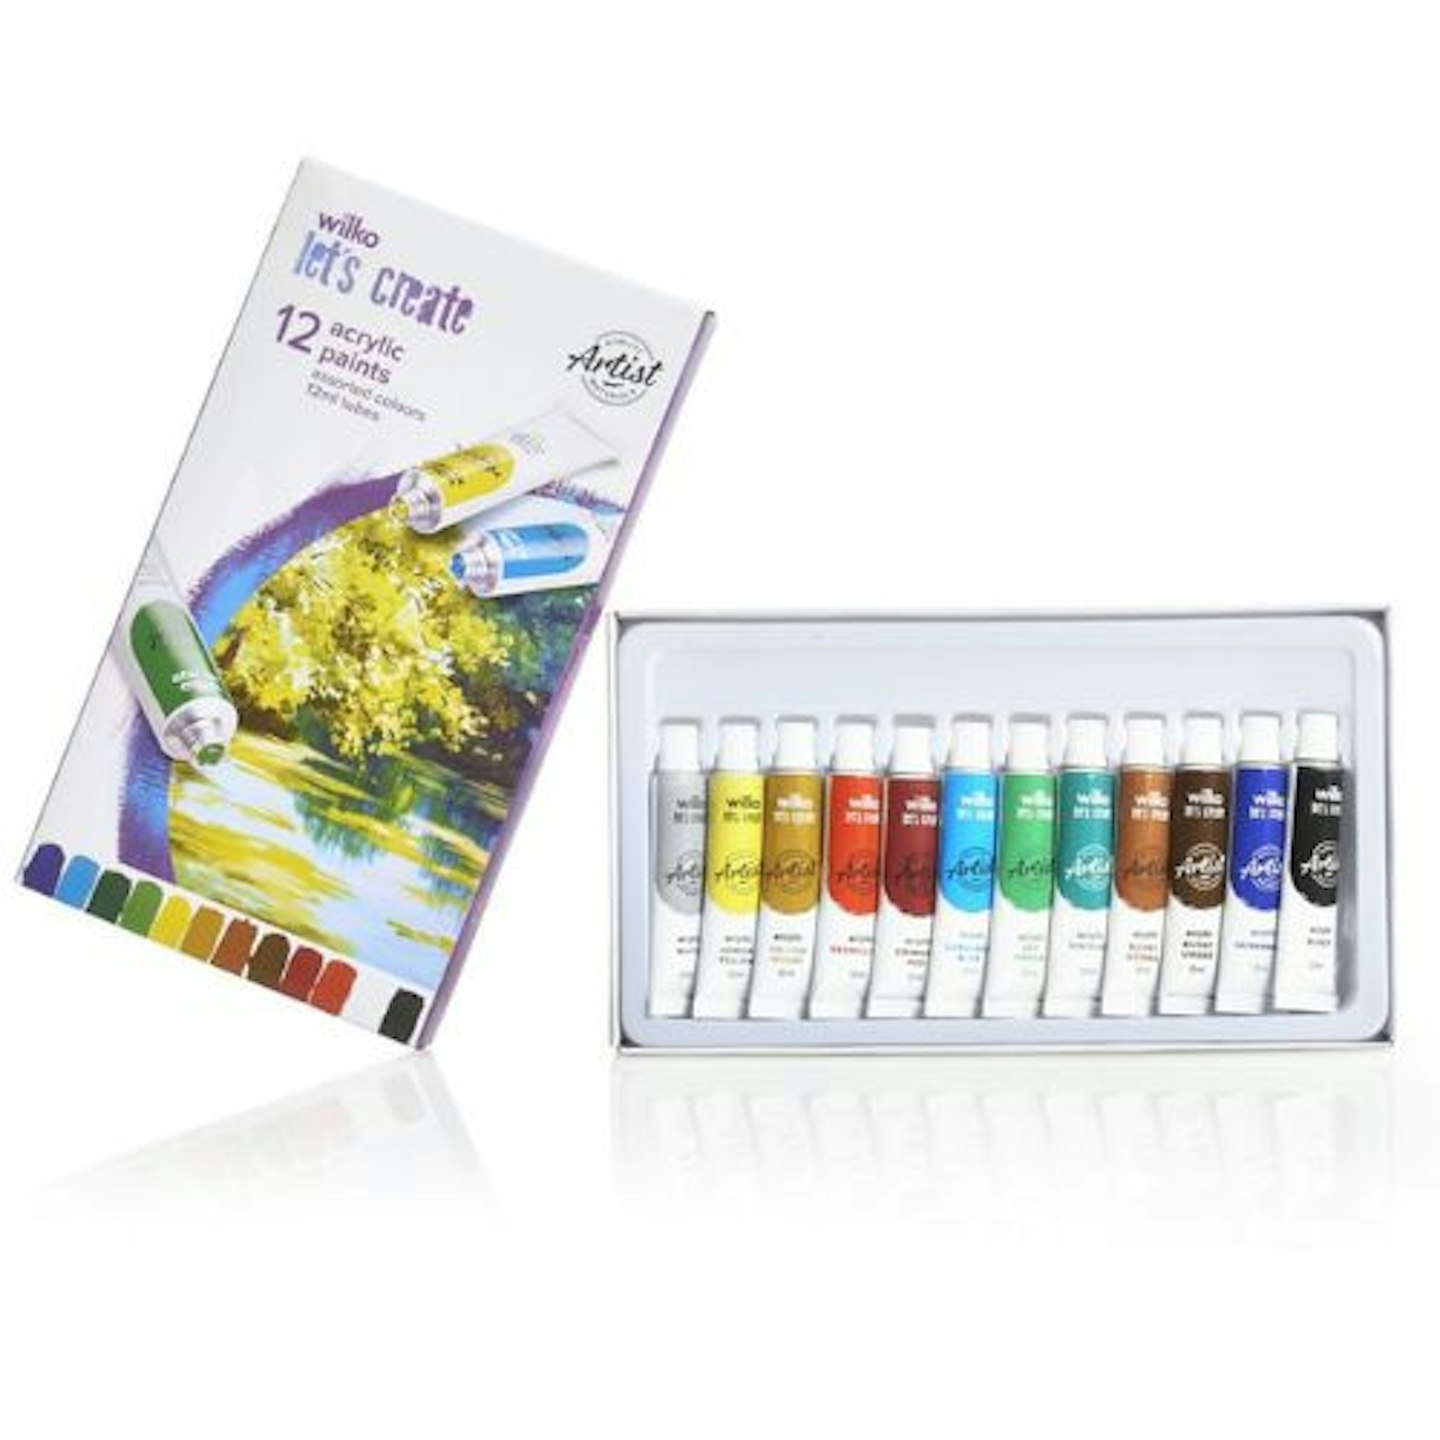 Wilko Let’s Create Acrylic Paints Assorted Colours, 12 Pack